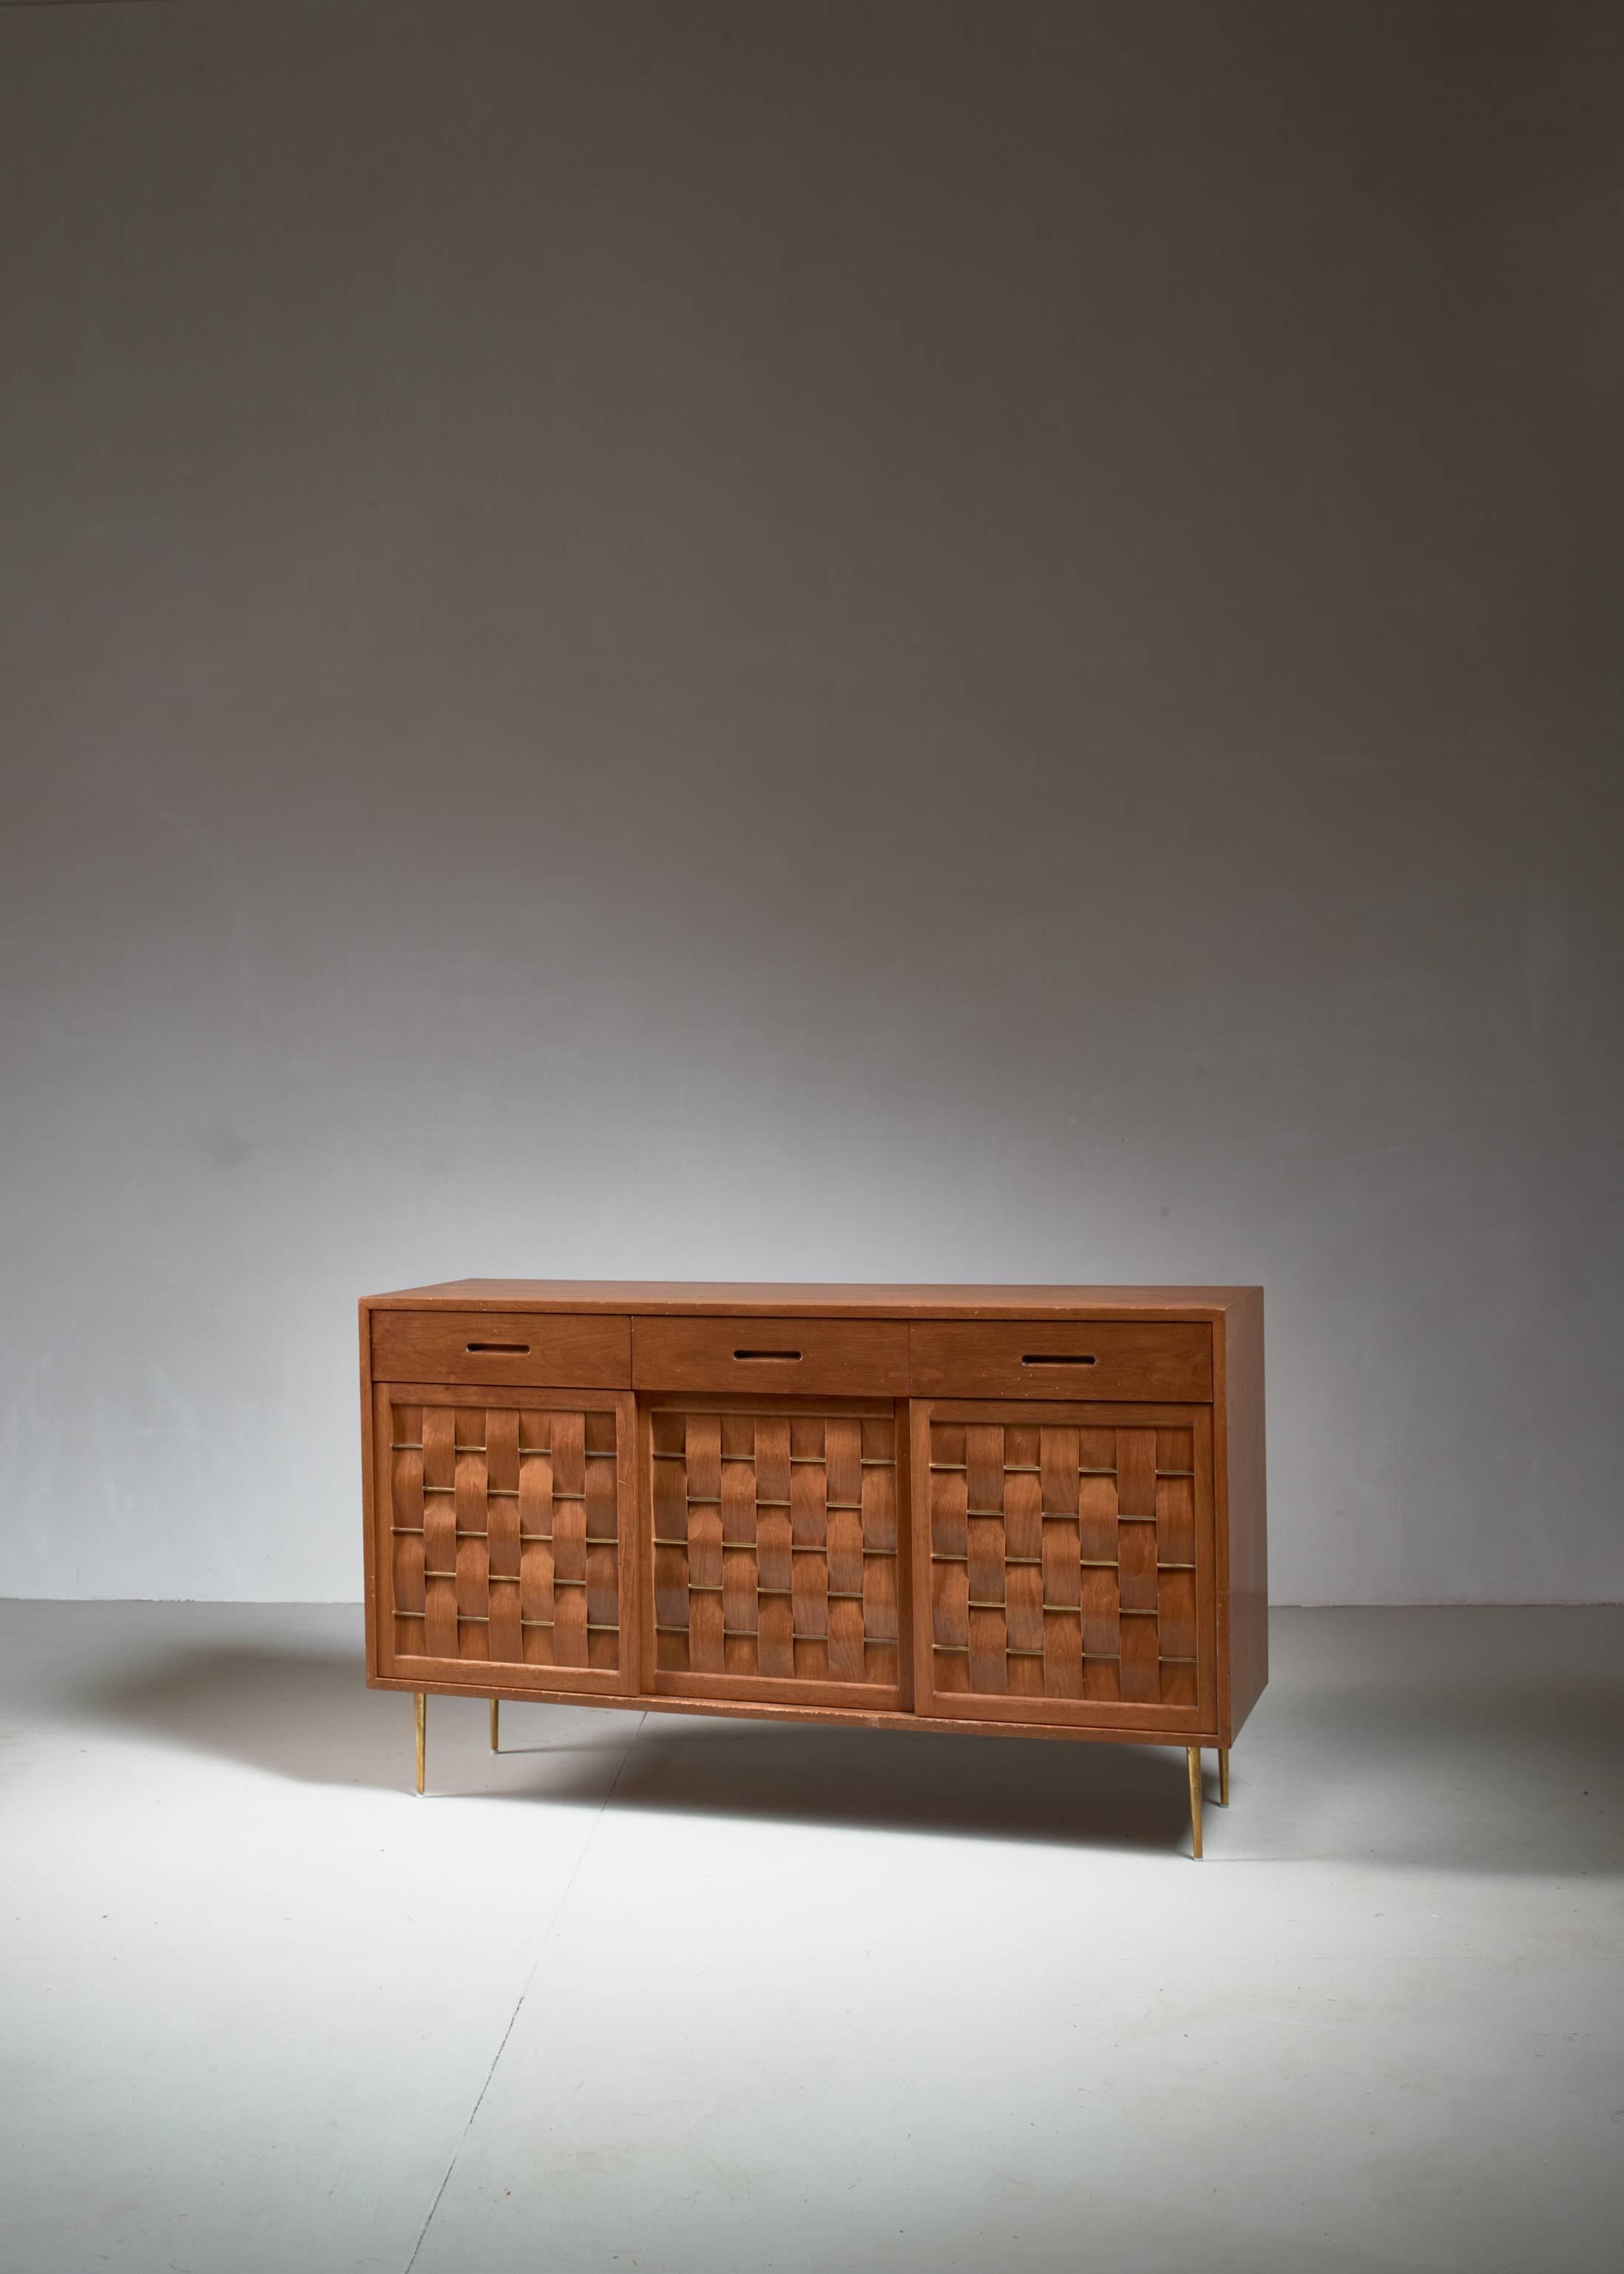 A rare and wonderful condition Edward Wormley wooden credenza for Dunbar, a rare edition with elegant brass feet.
It has three sliding panel doors and three drawers above them. The doors are made of thin wooden strips woven through brass rods, with